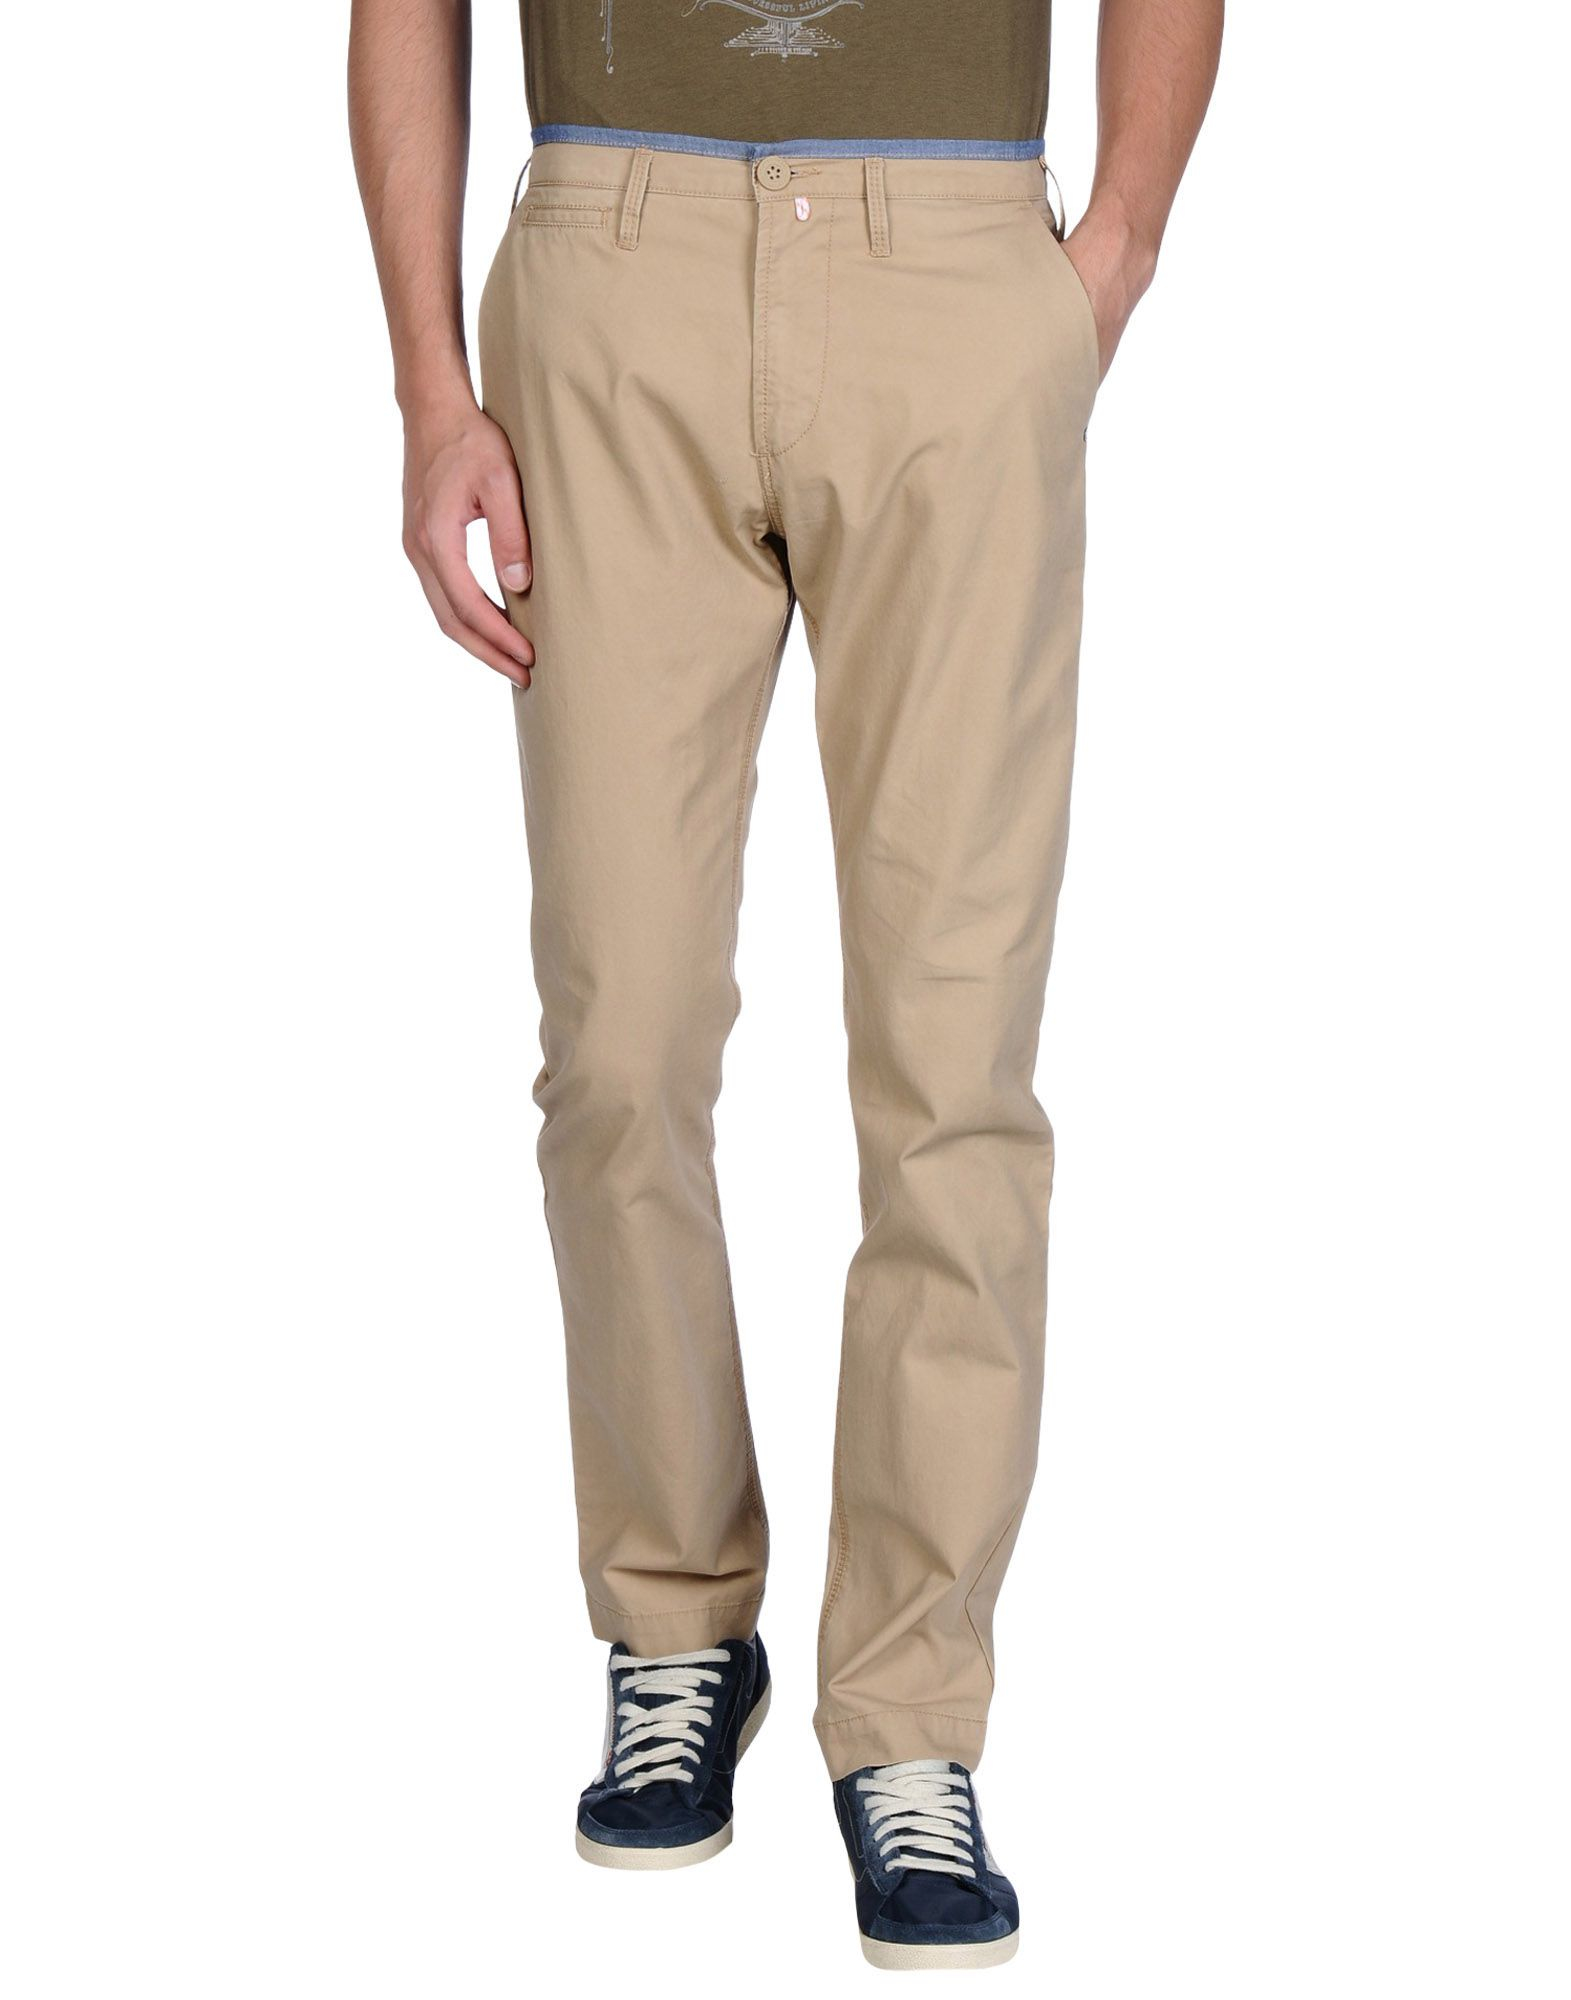 55dsl Casual Trouser in Beige for Men - Save 50% | Lyst